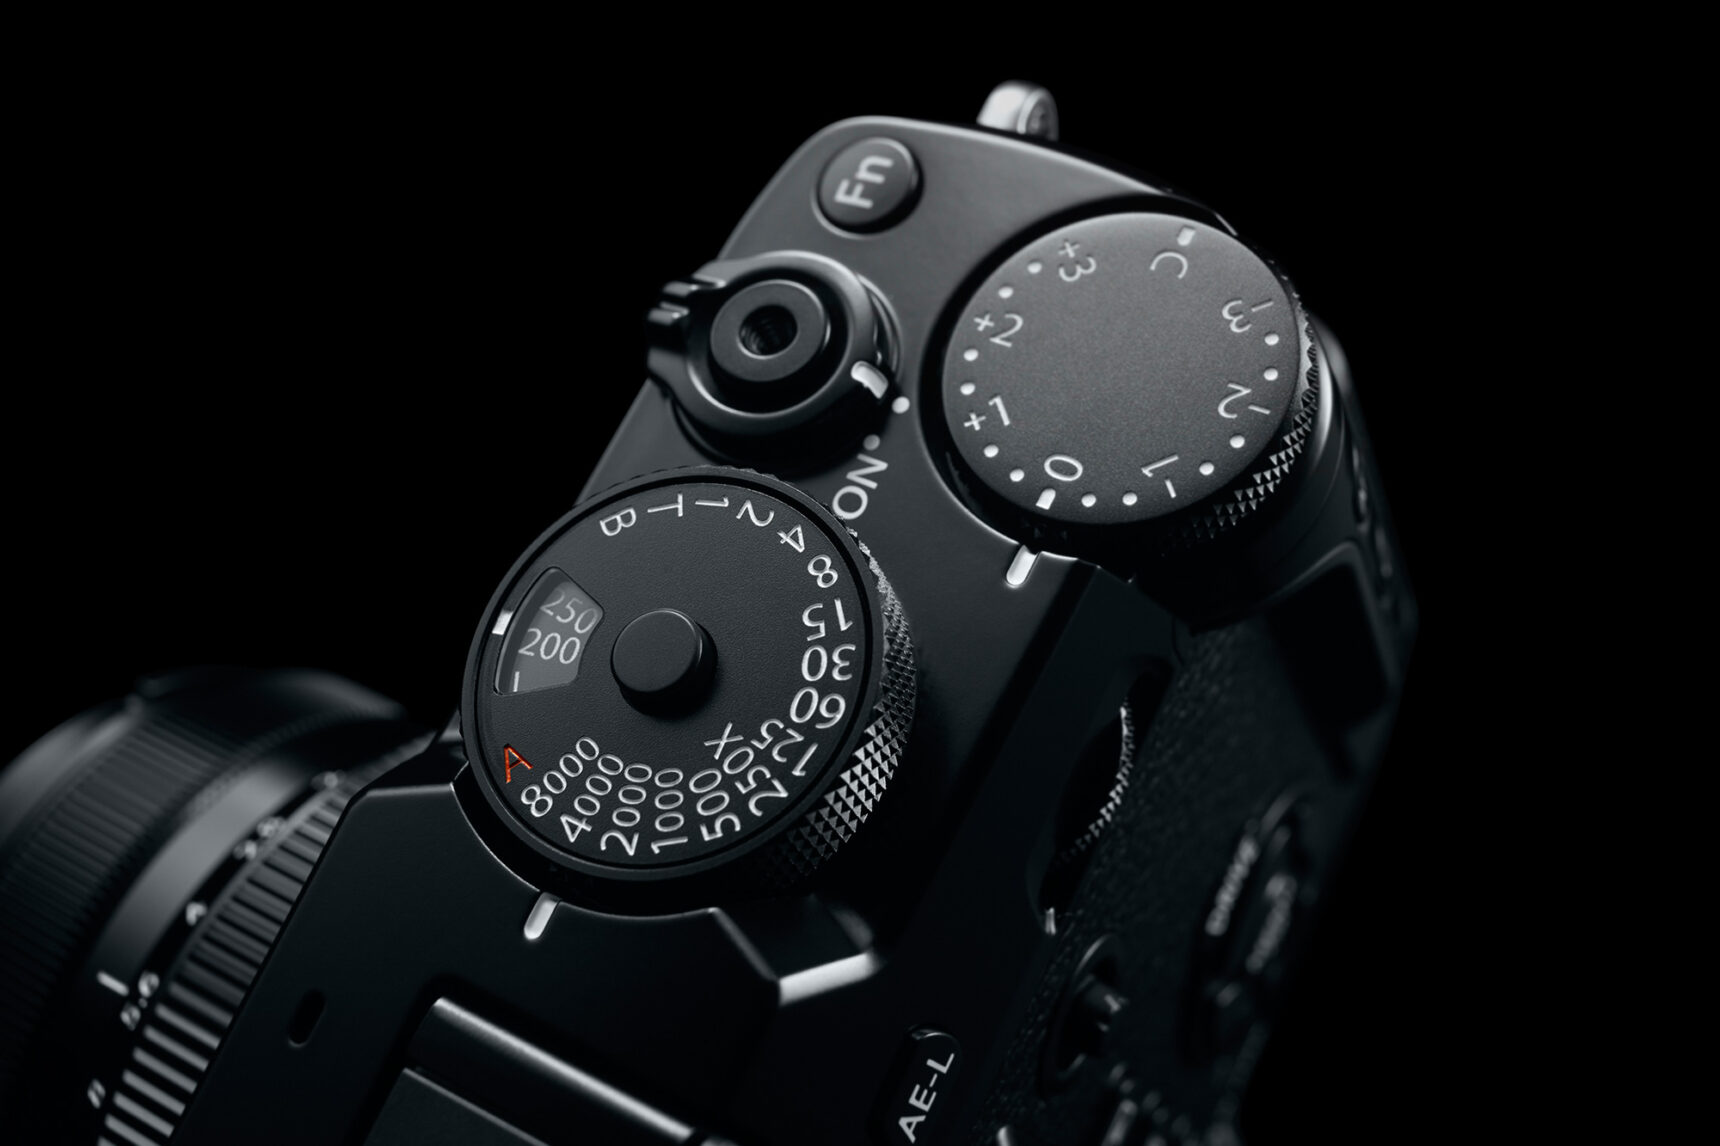 Fuji X-Pro2 Street Photography Review - ISO Dial